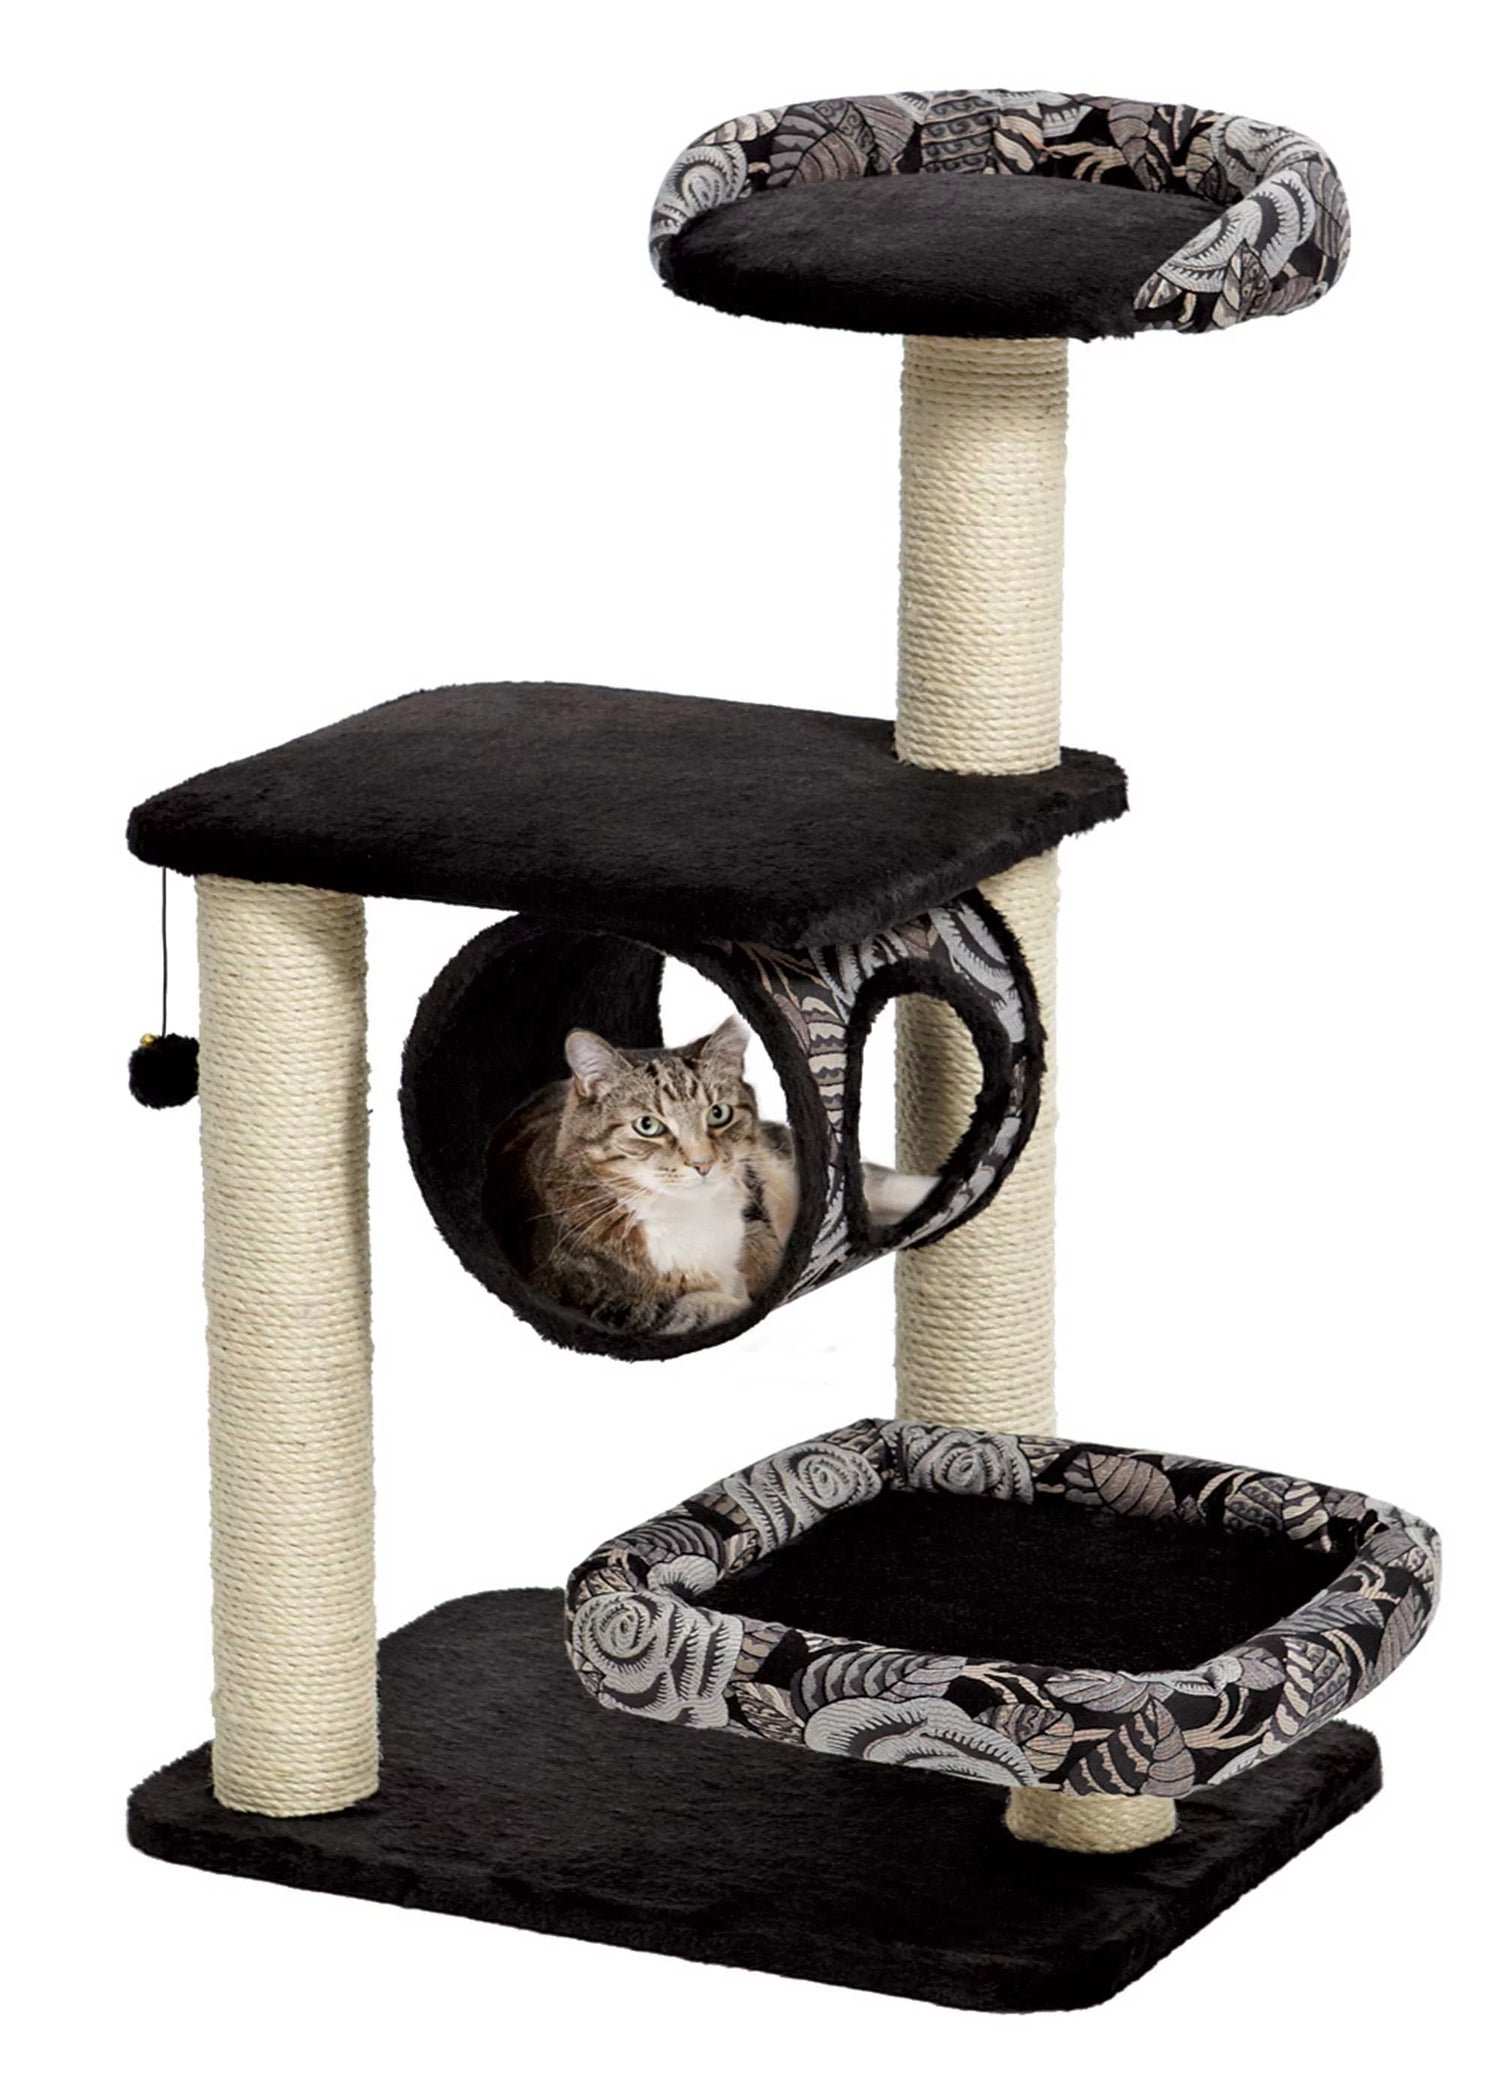 Midwest Cat Furniture in Escapade Style